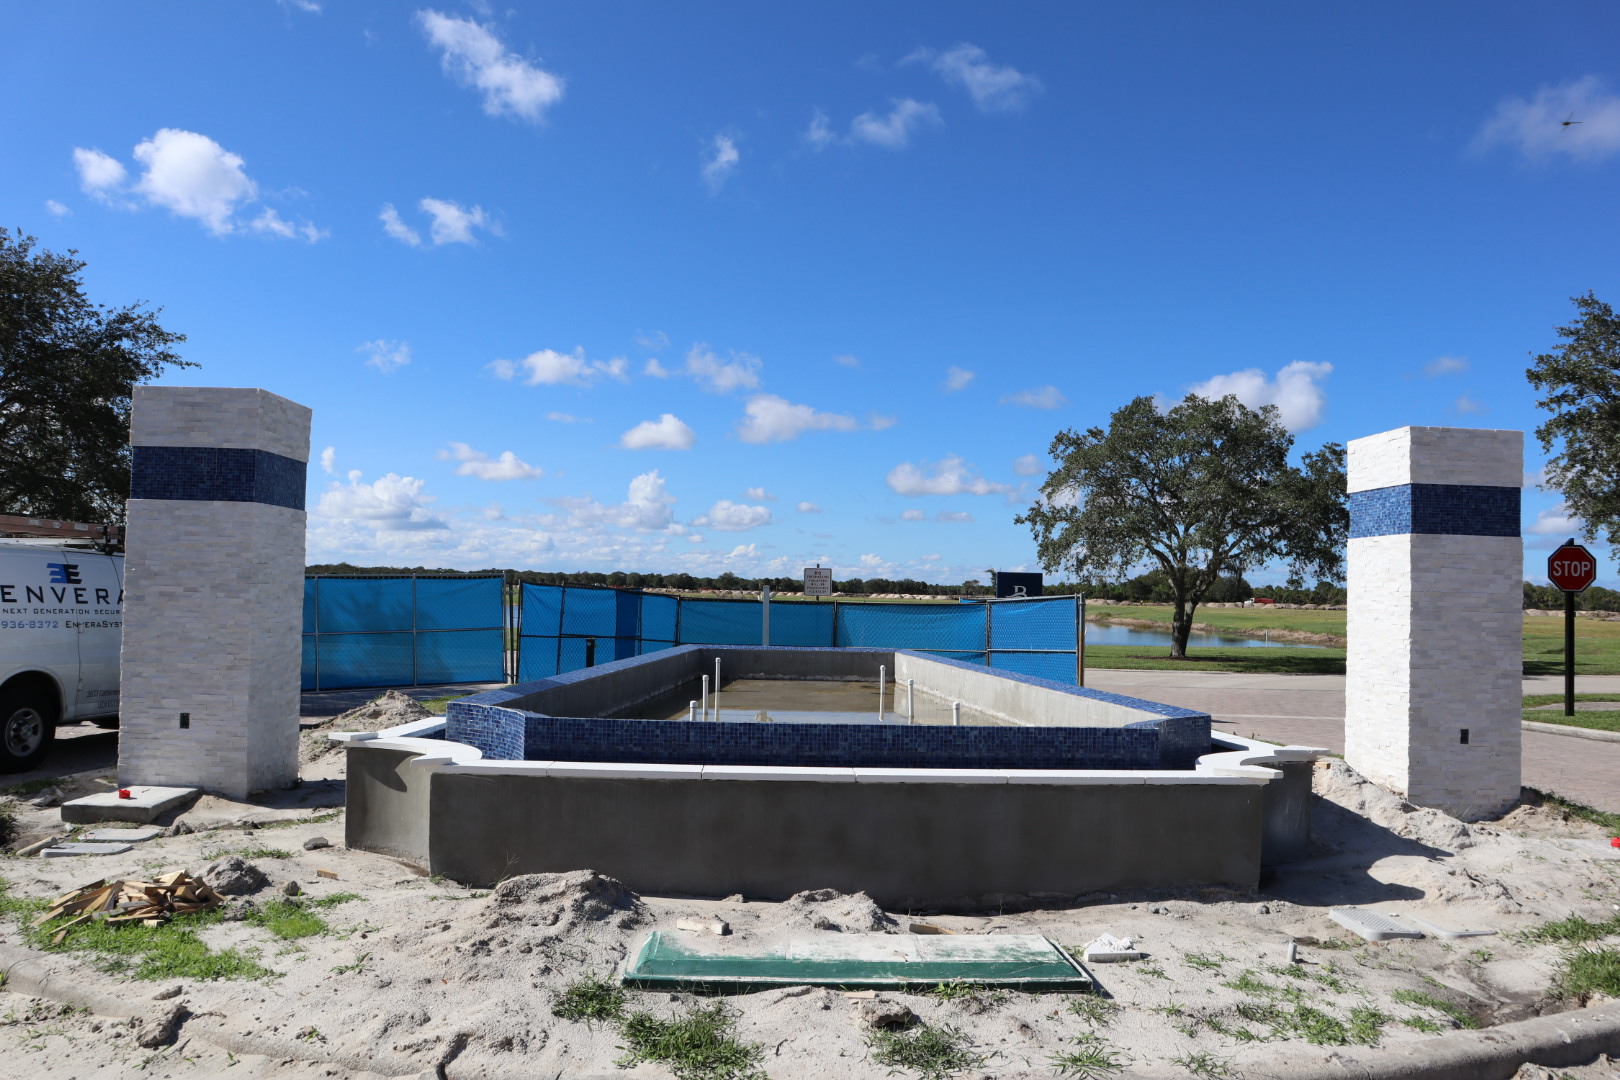 new water fountain under construction at bridgewater entrance in martin county florida